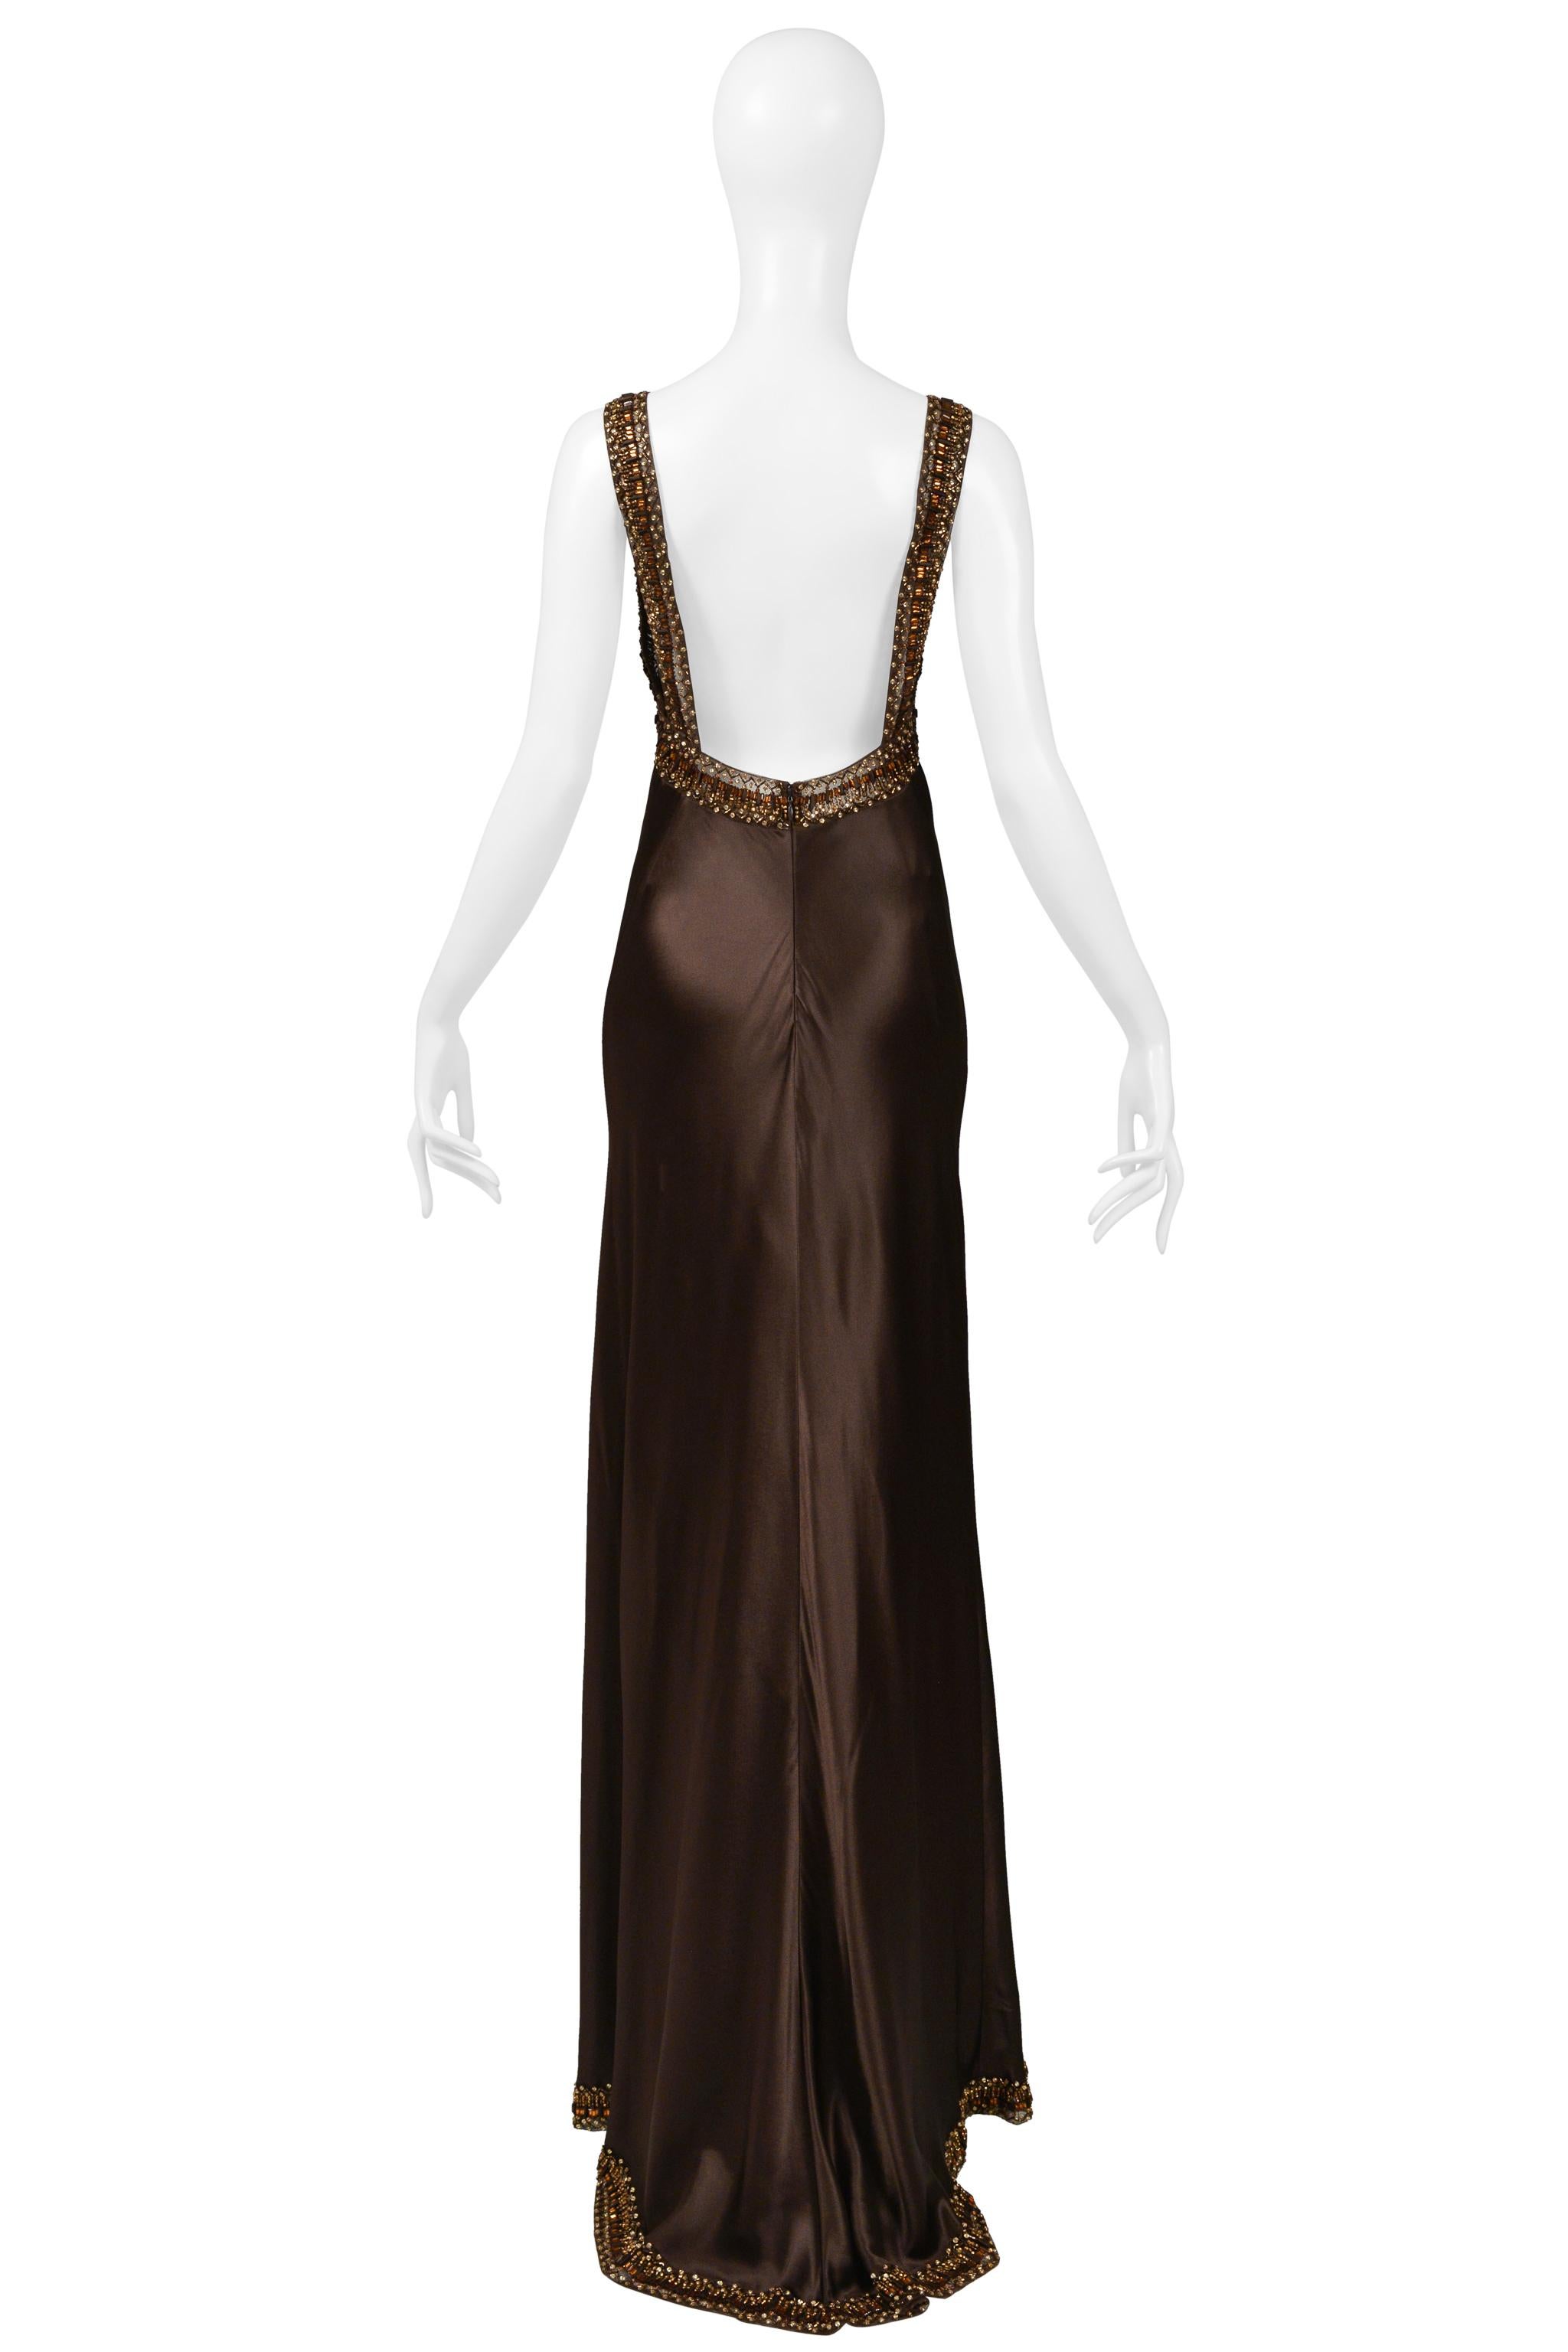 Valentino Brown Silk Evening Gown With Jacket AW 2006-07 For Sale 4